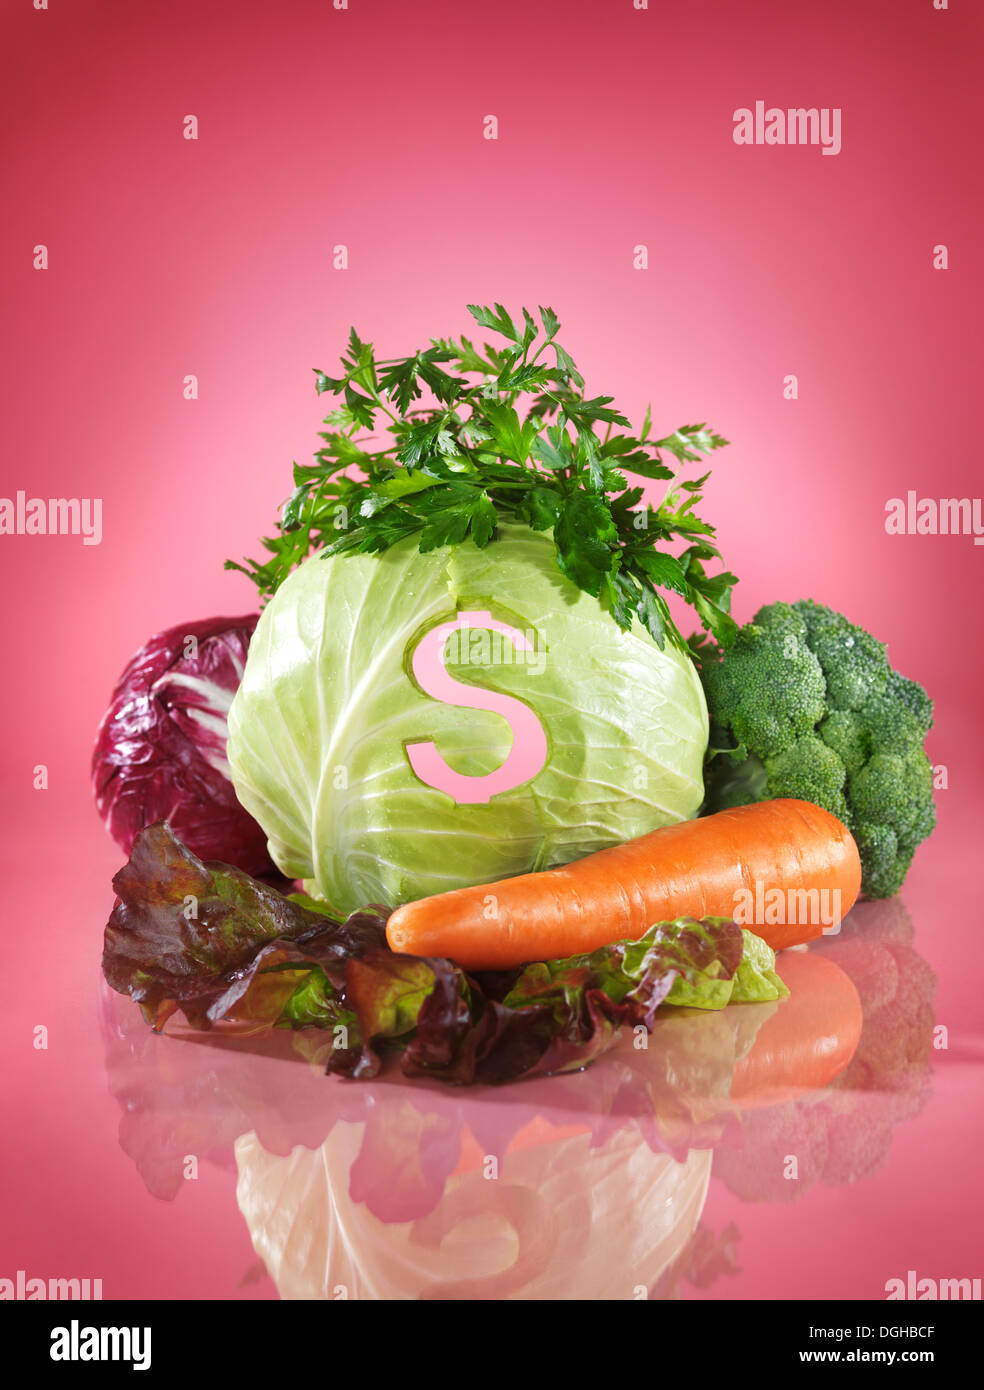 Vegetable food conceptual still life with dollar symbol on cabbage. Food price, saving money on produce concept Stock Photo